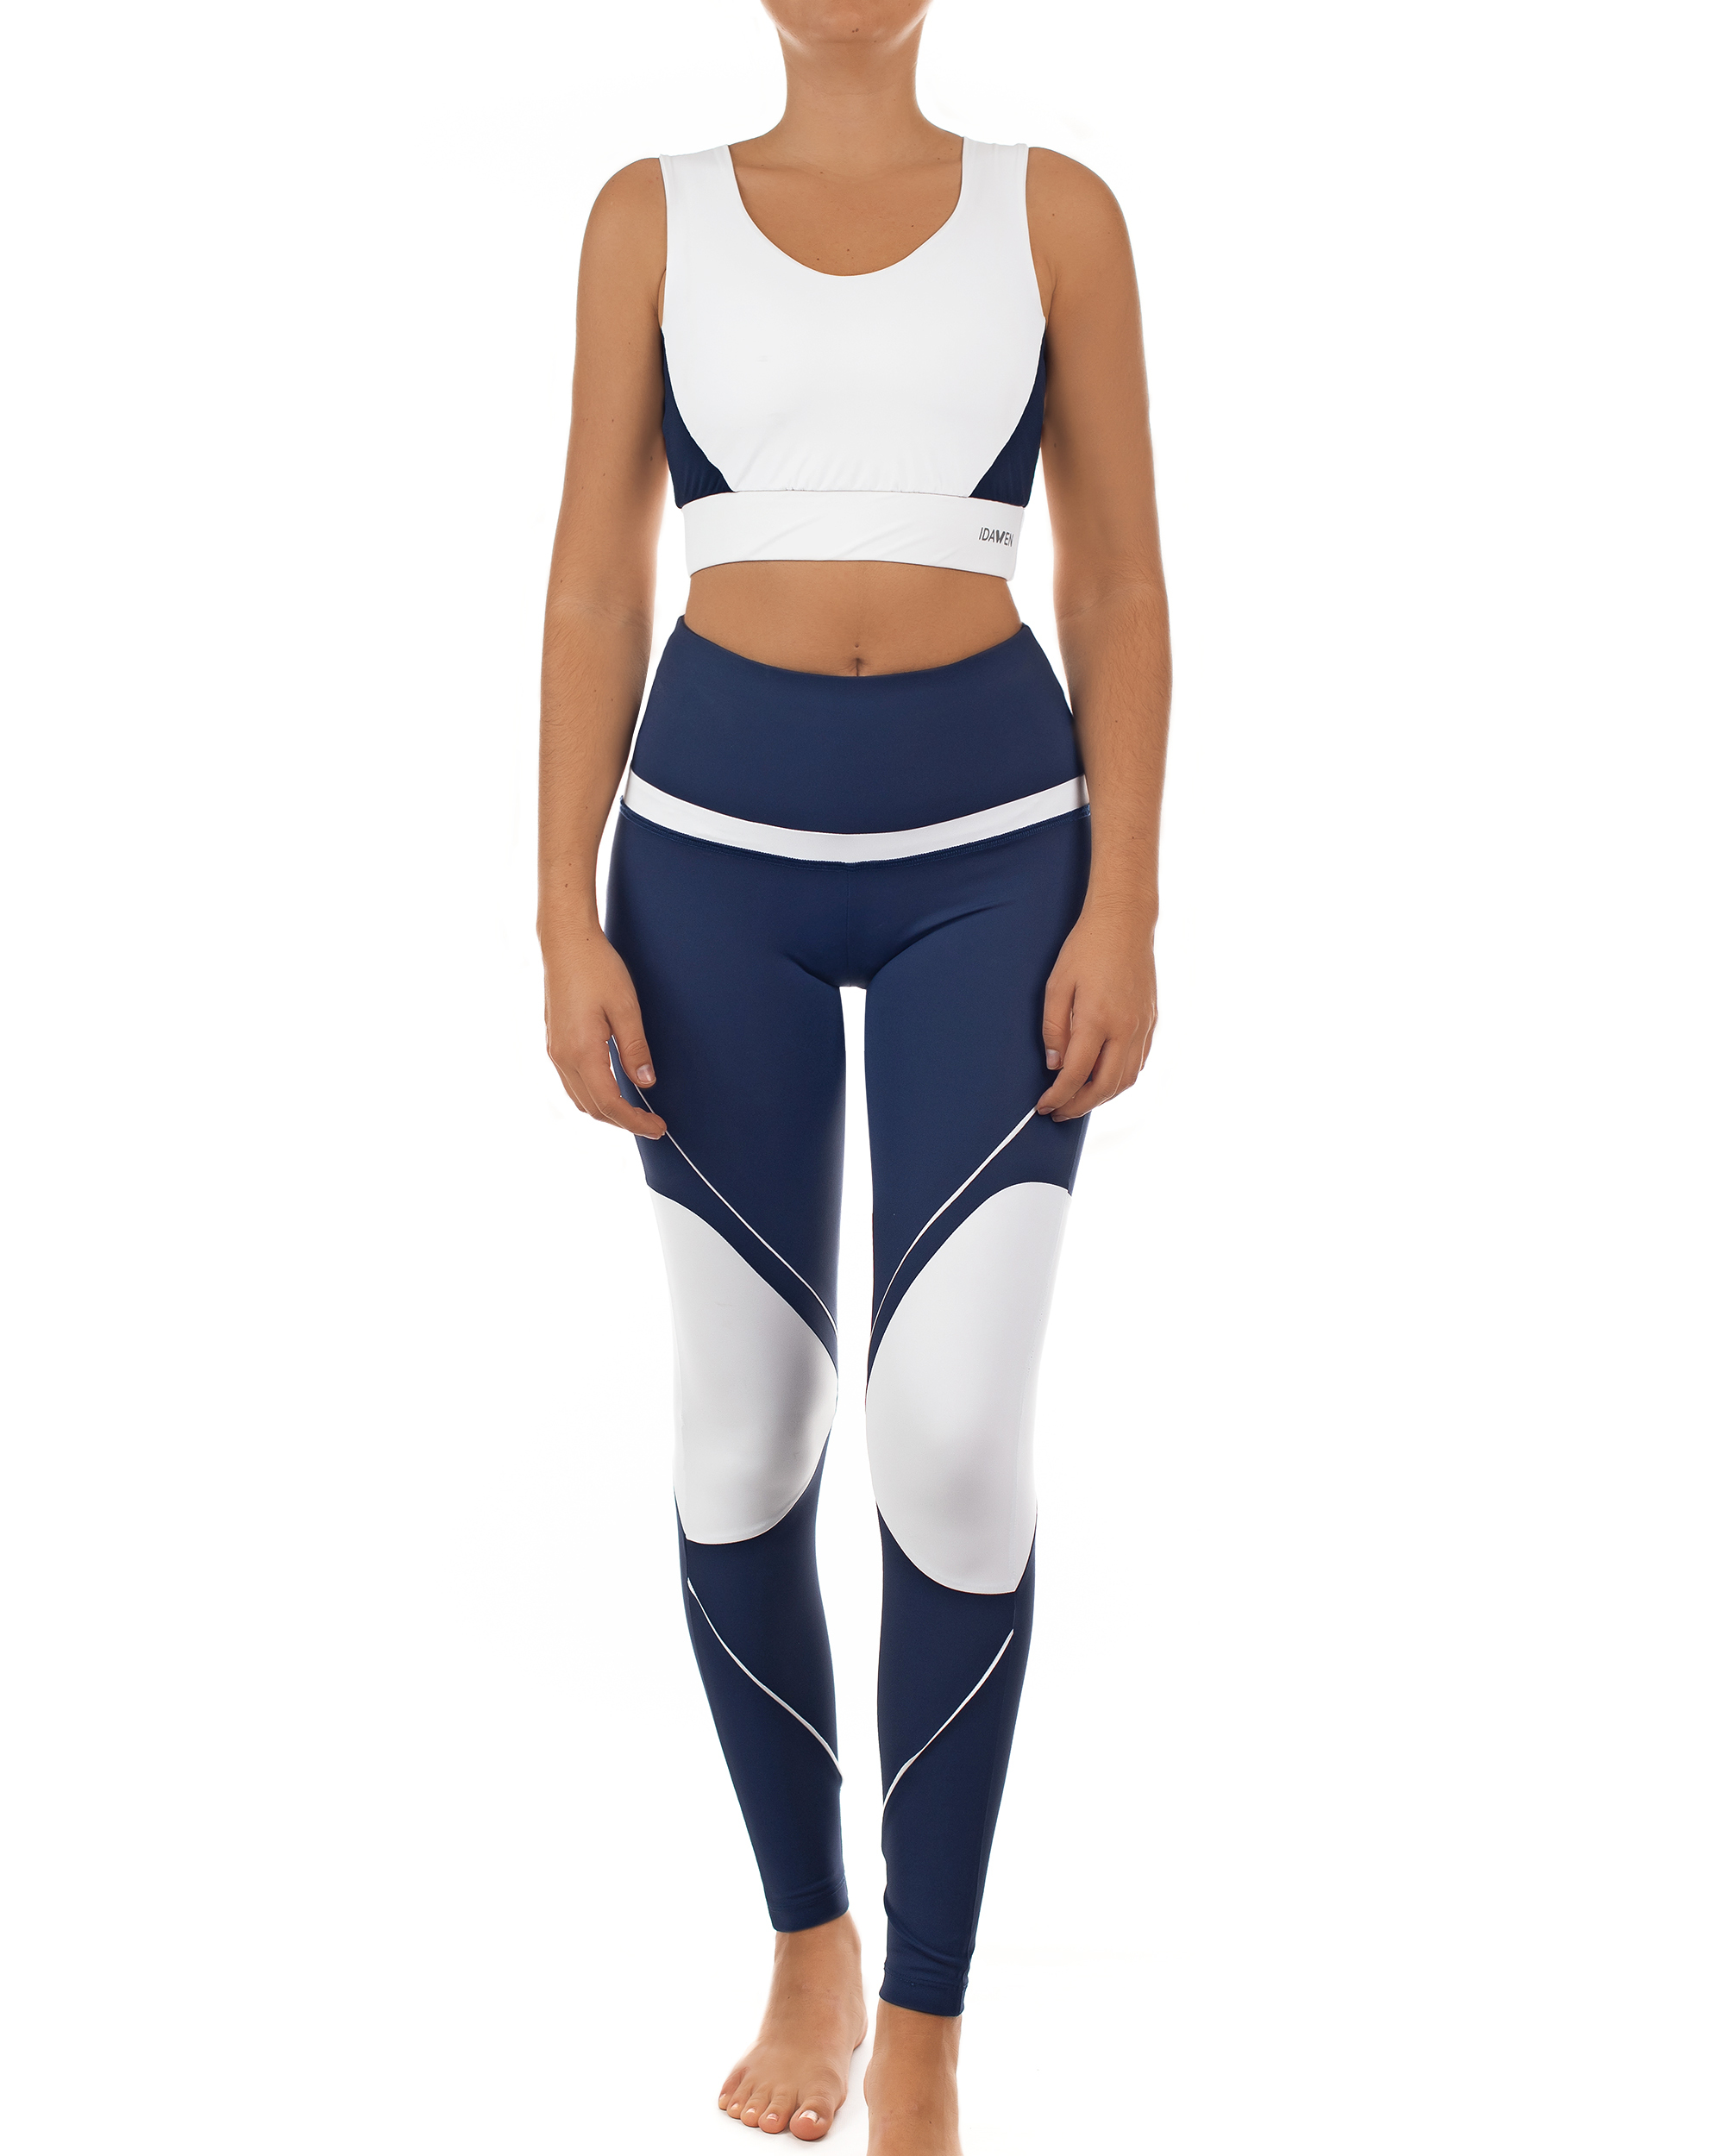  SPORT  LEGGING  FOR WOMAN BLUE AND WHITE